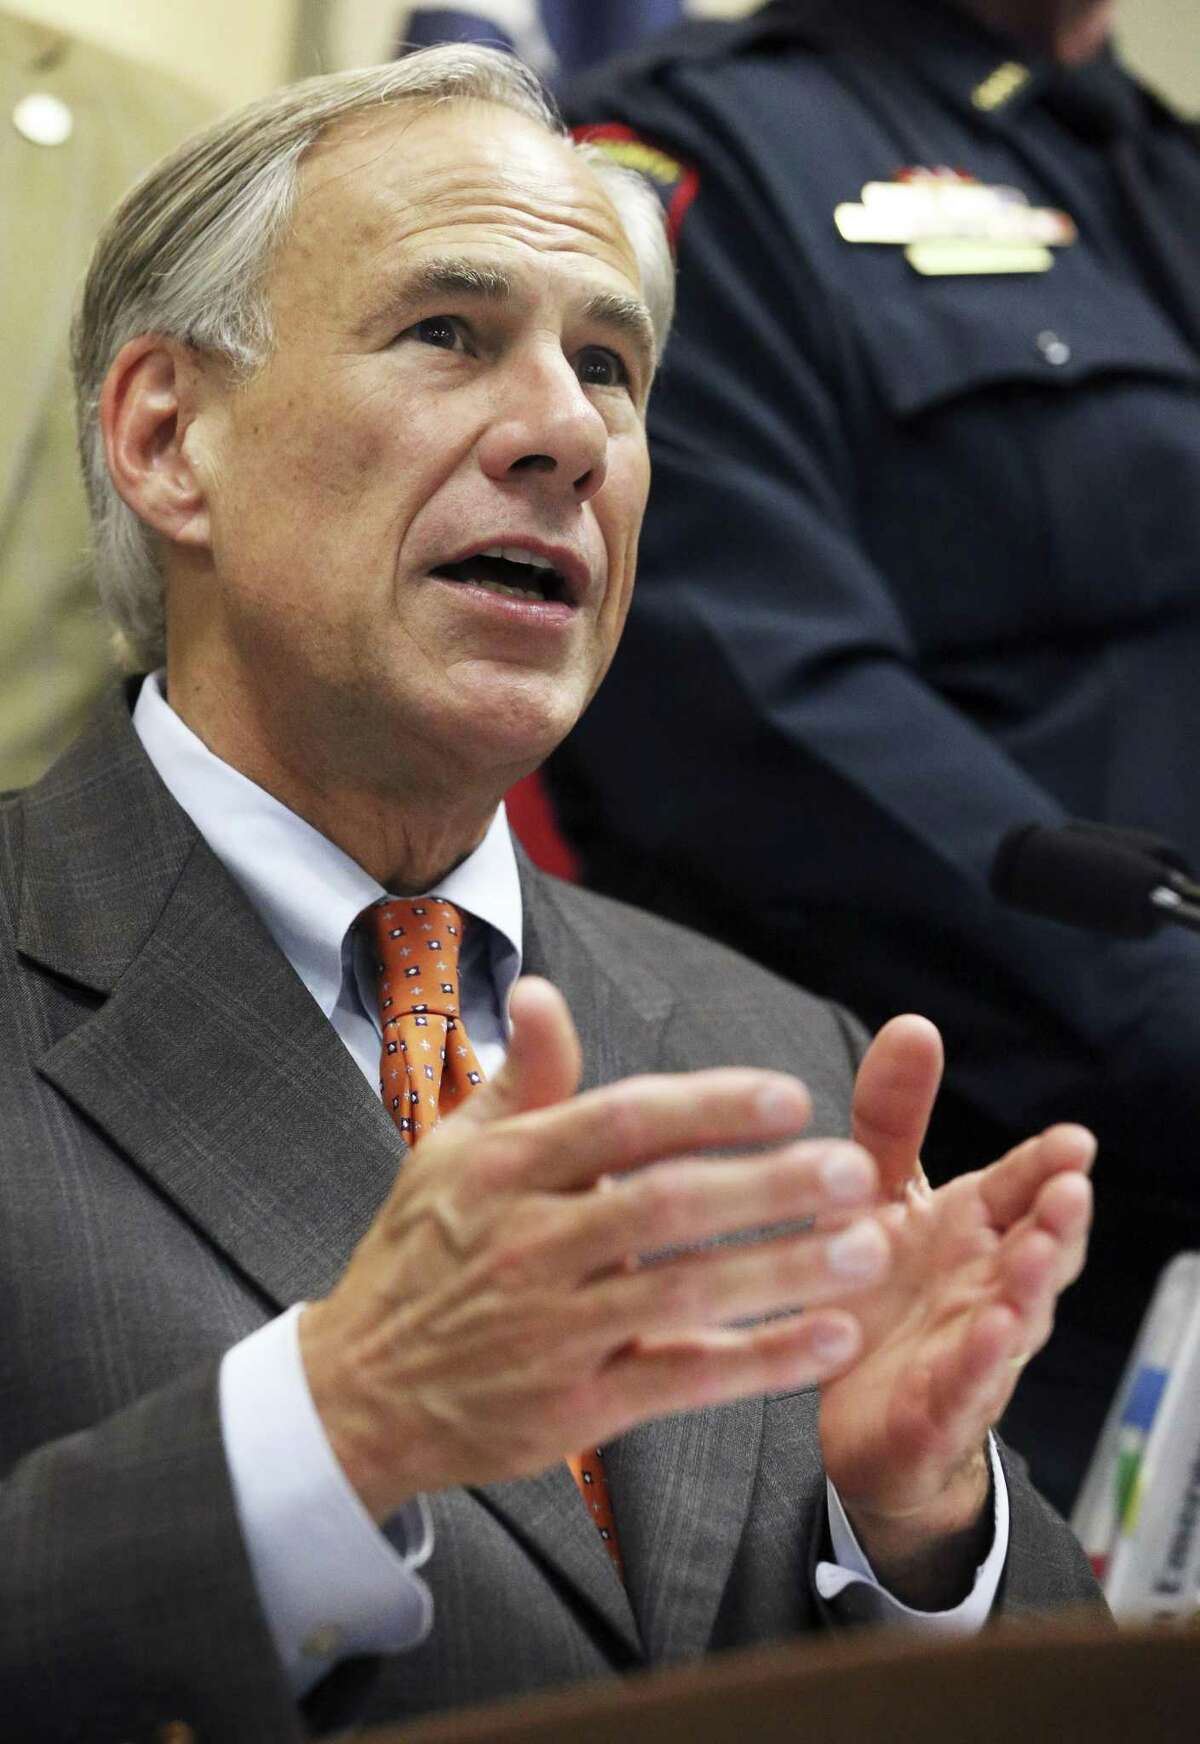 As Gov. Greg Abbott and Texas state Sen. Sylvia Garcia spar over the special election, a deadline has passed to get it on the Nov. 6 midterm ballot. Now there is a possibility that nearly 850,000 residents in Senate District 6 — which includes Houston’s East End, South Houston and part of Pasadena — could be without a representative when the Texas Legislature convenes in January. >>>See the big contributions in Texas' 2018 congressional campaigns ...